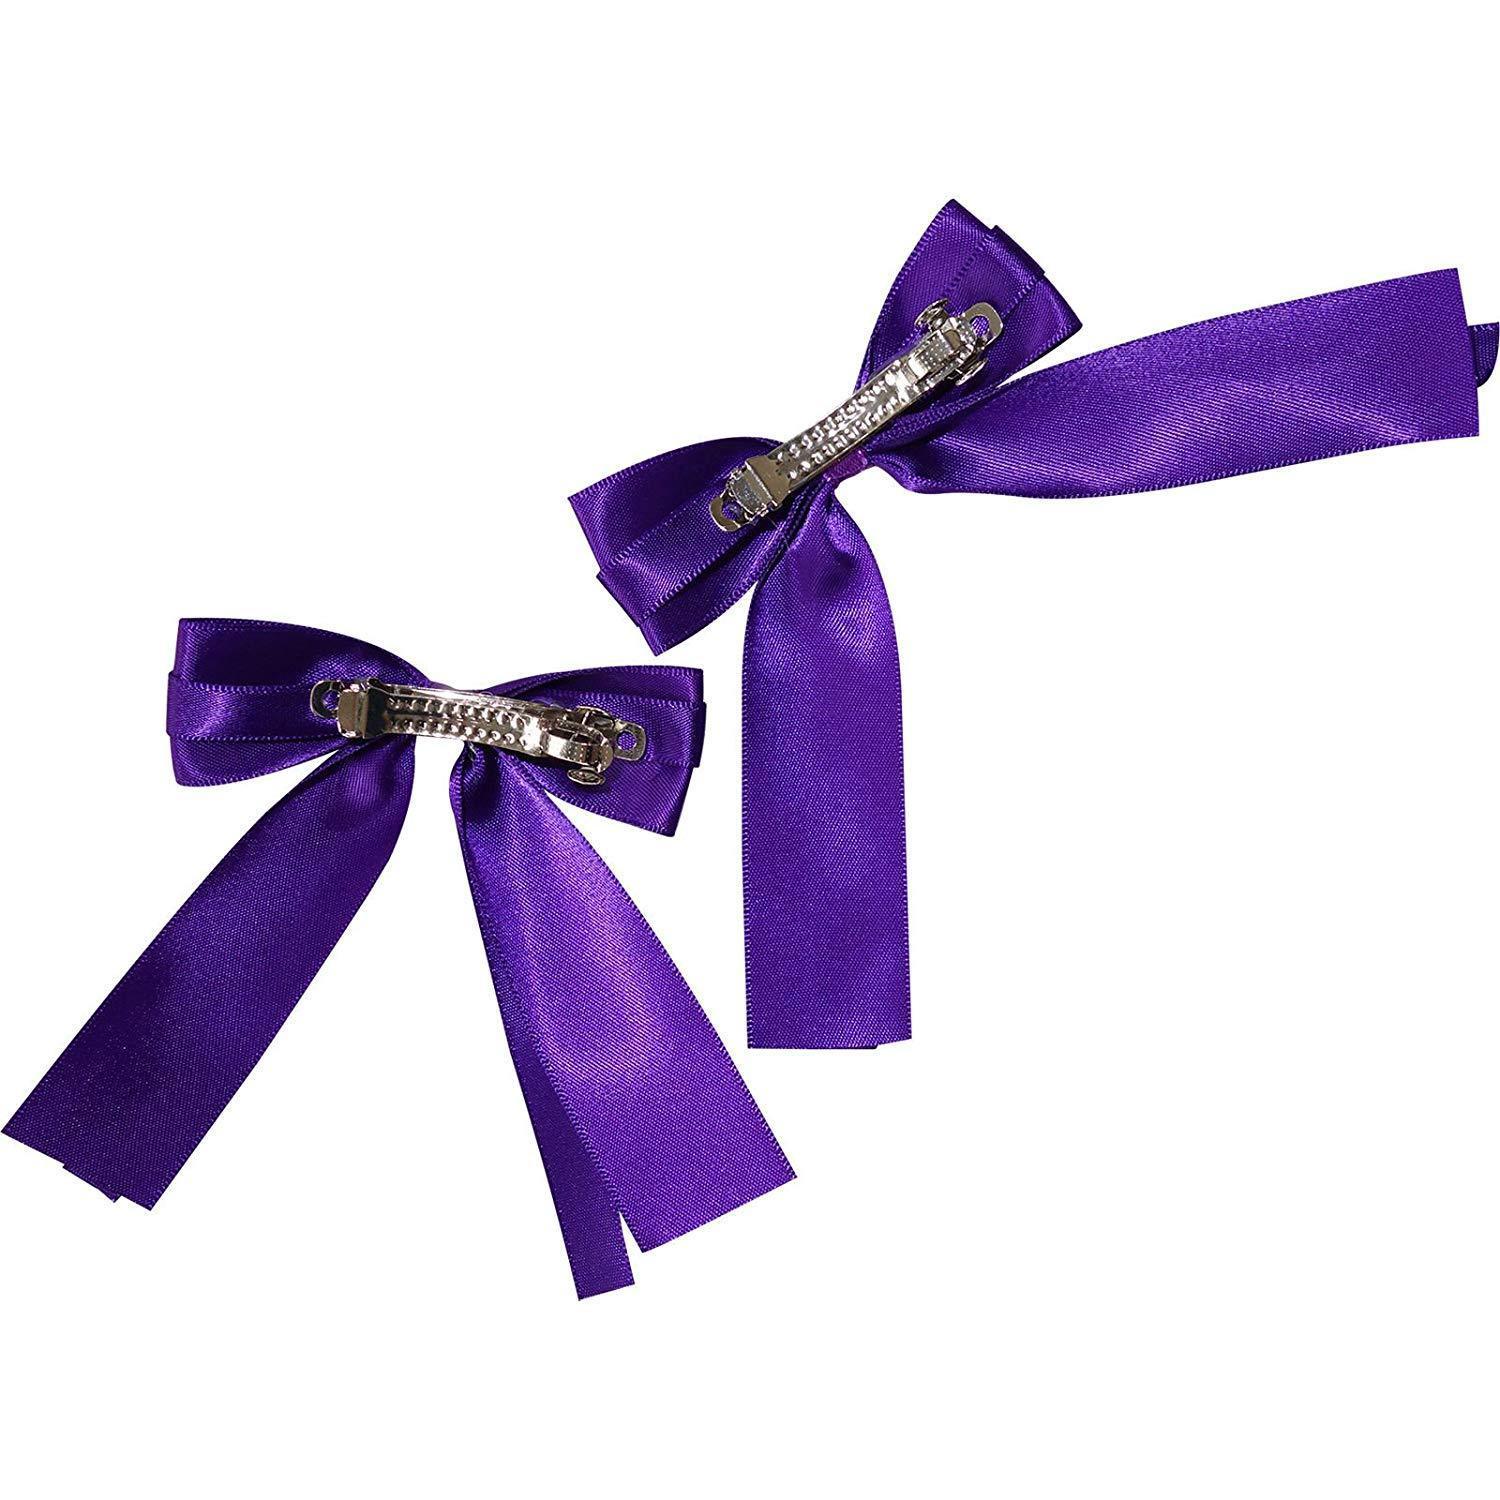 Pair of Purple Hair Bow Ribbon Clips Grips Girls Toddler Baby Kids Accessories